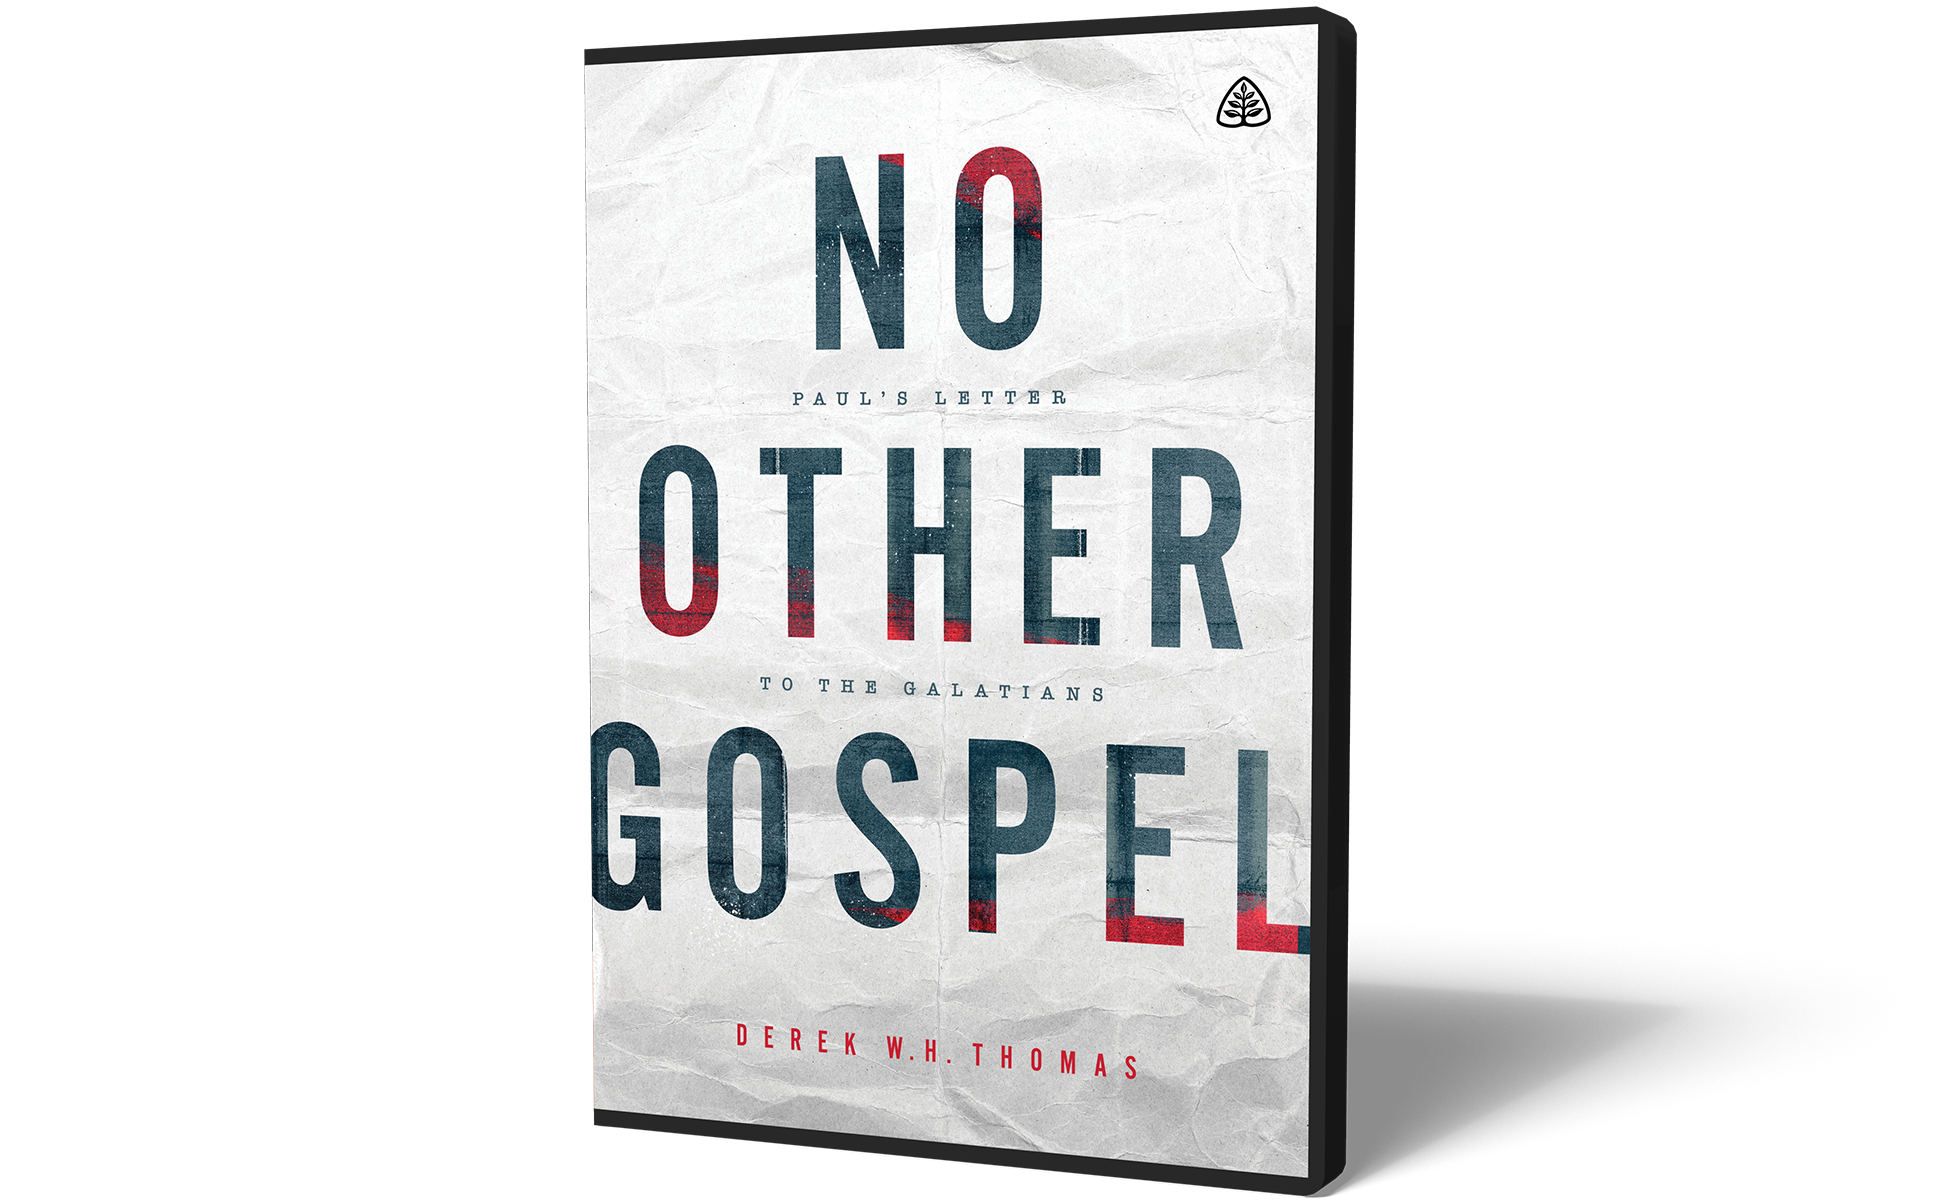 No Other Gospel: Paul's Letter to the Galatians